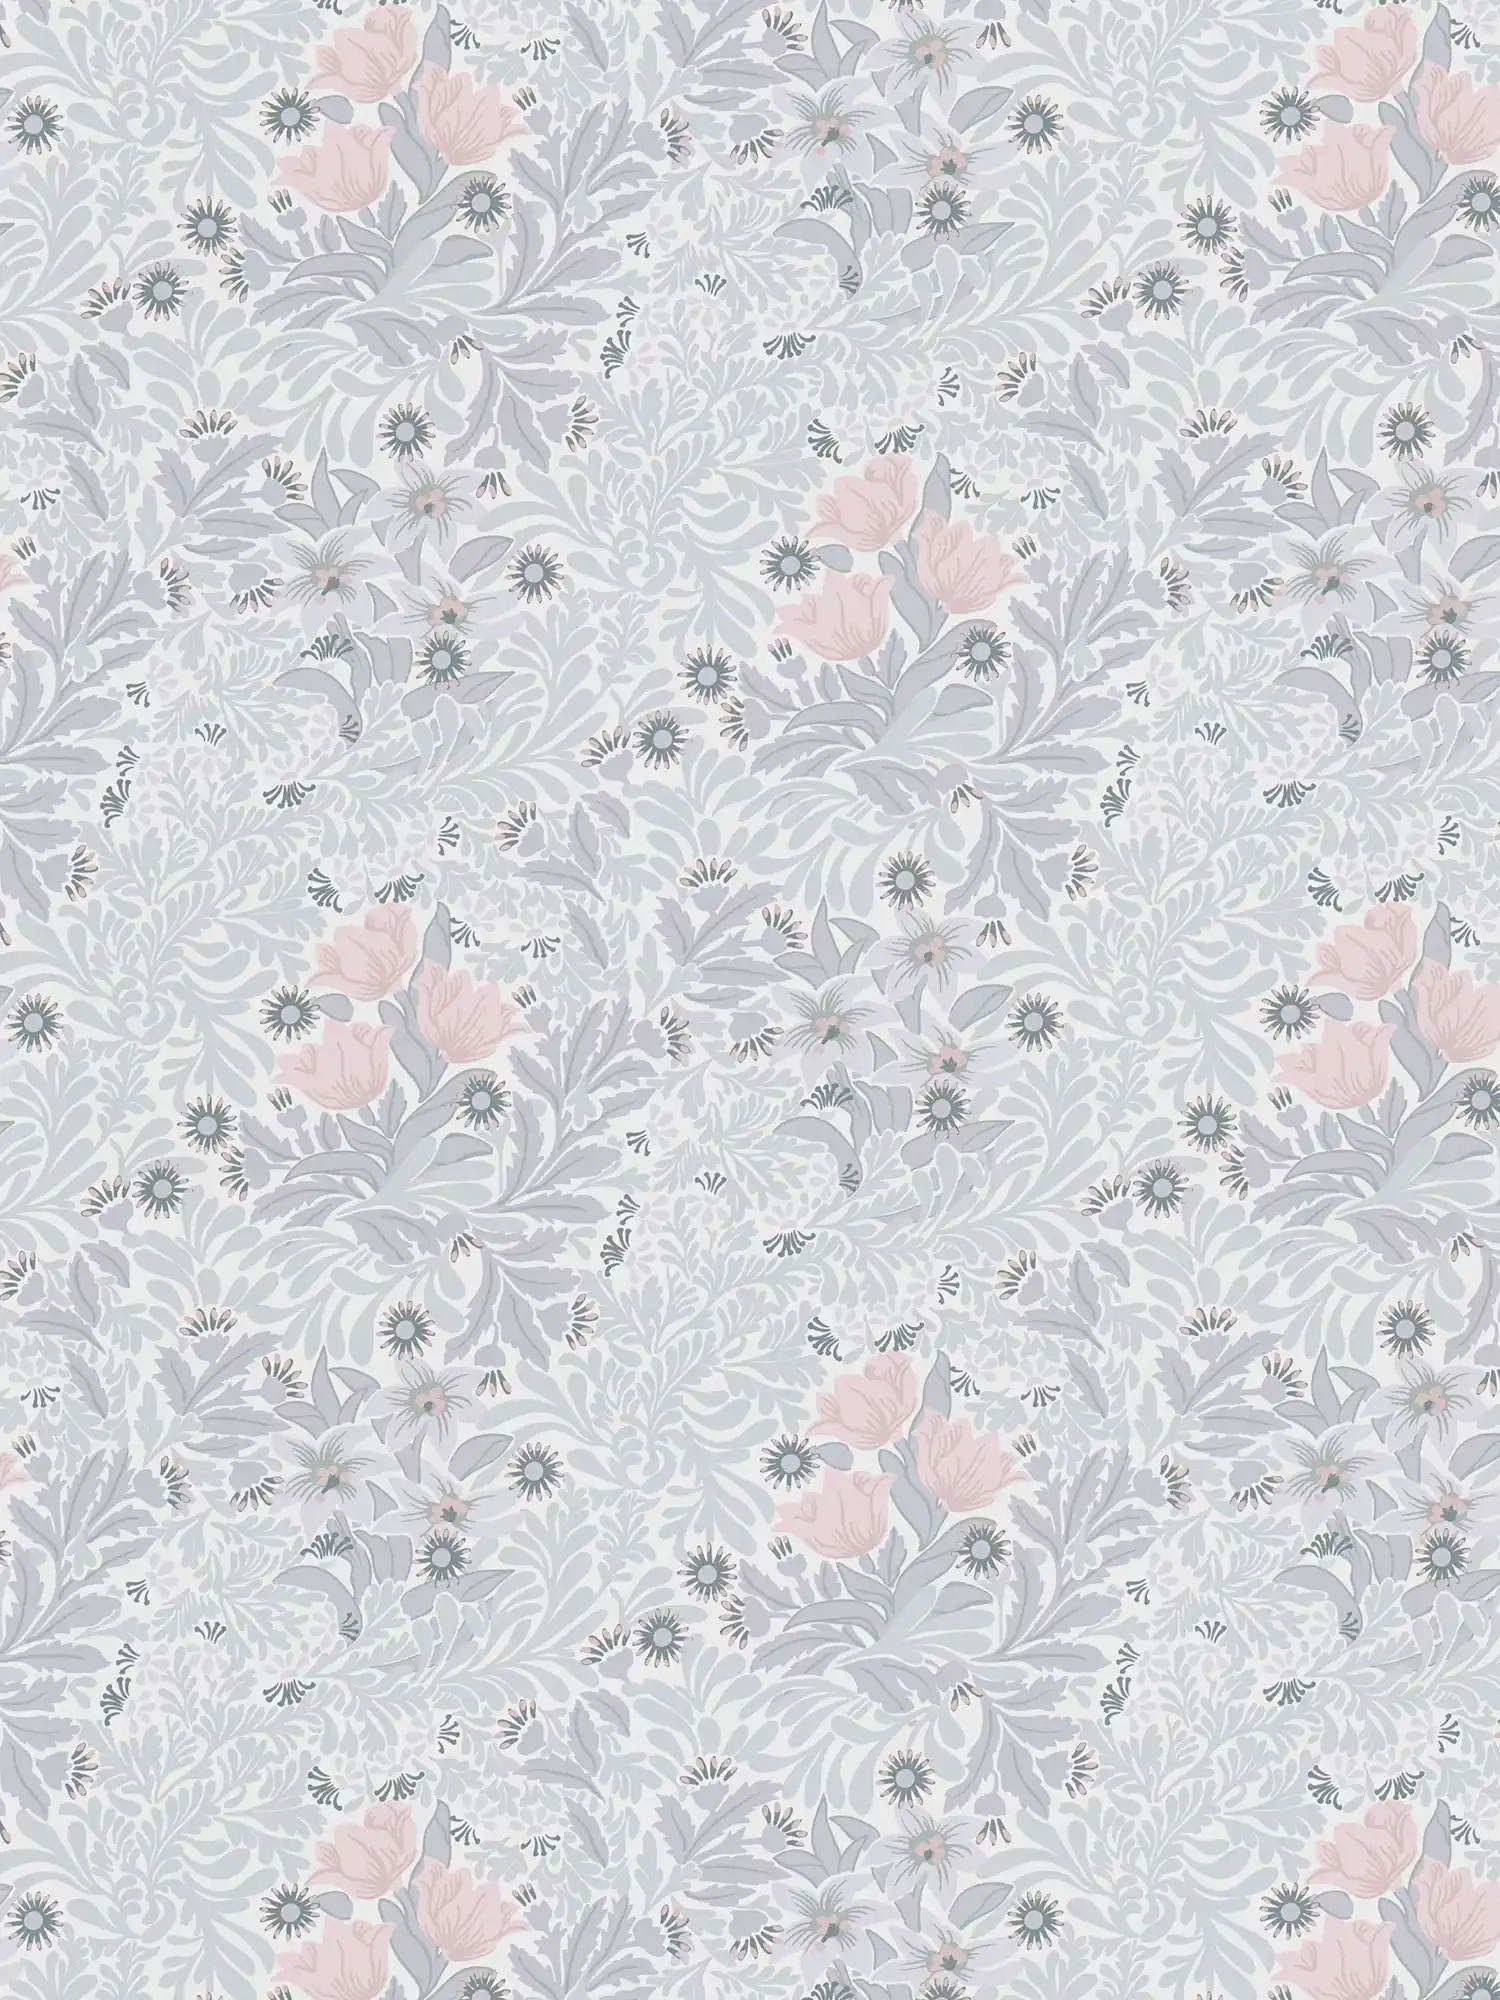 Non-woven wallpaper with floral pattern in soft shades - grey, pink, white
